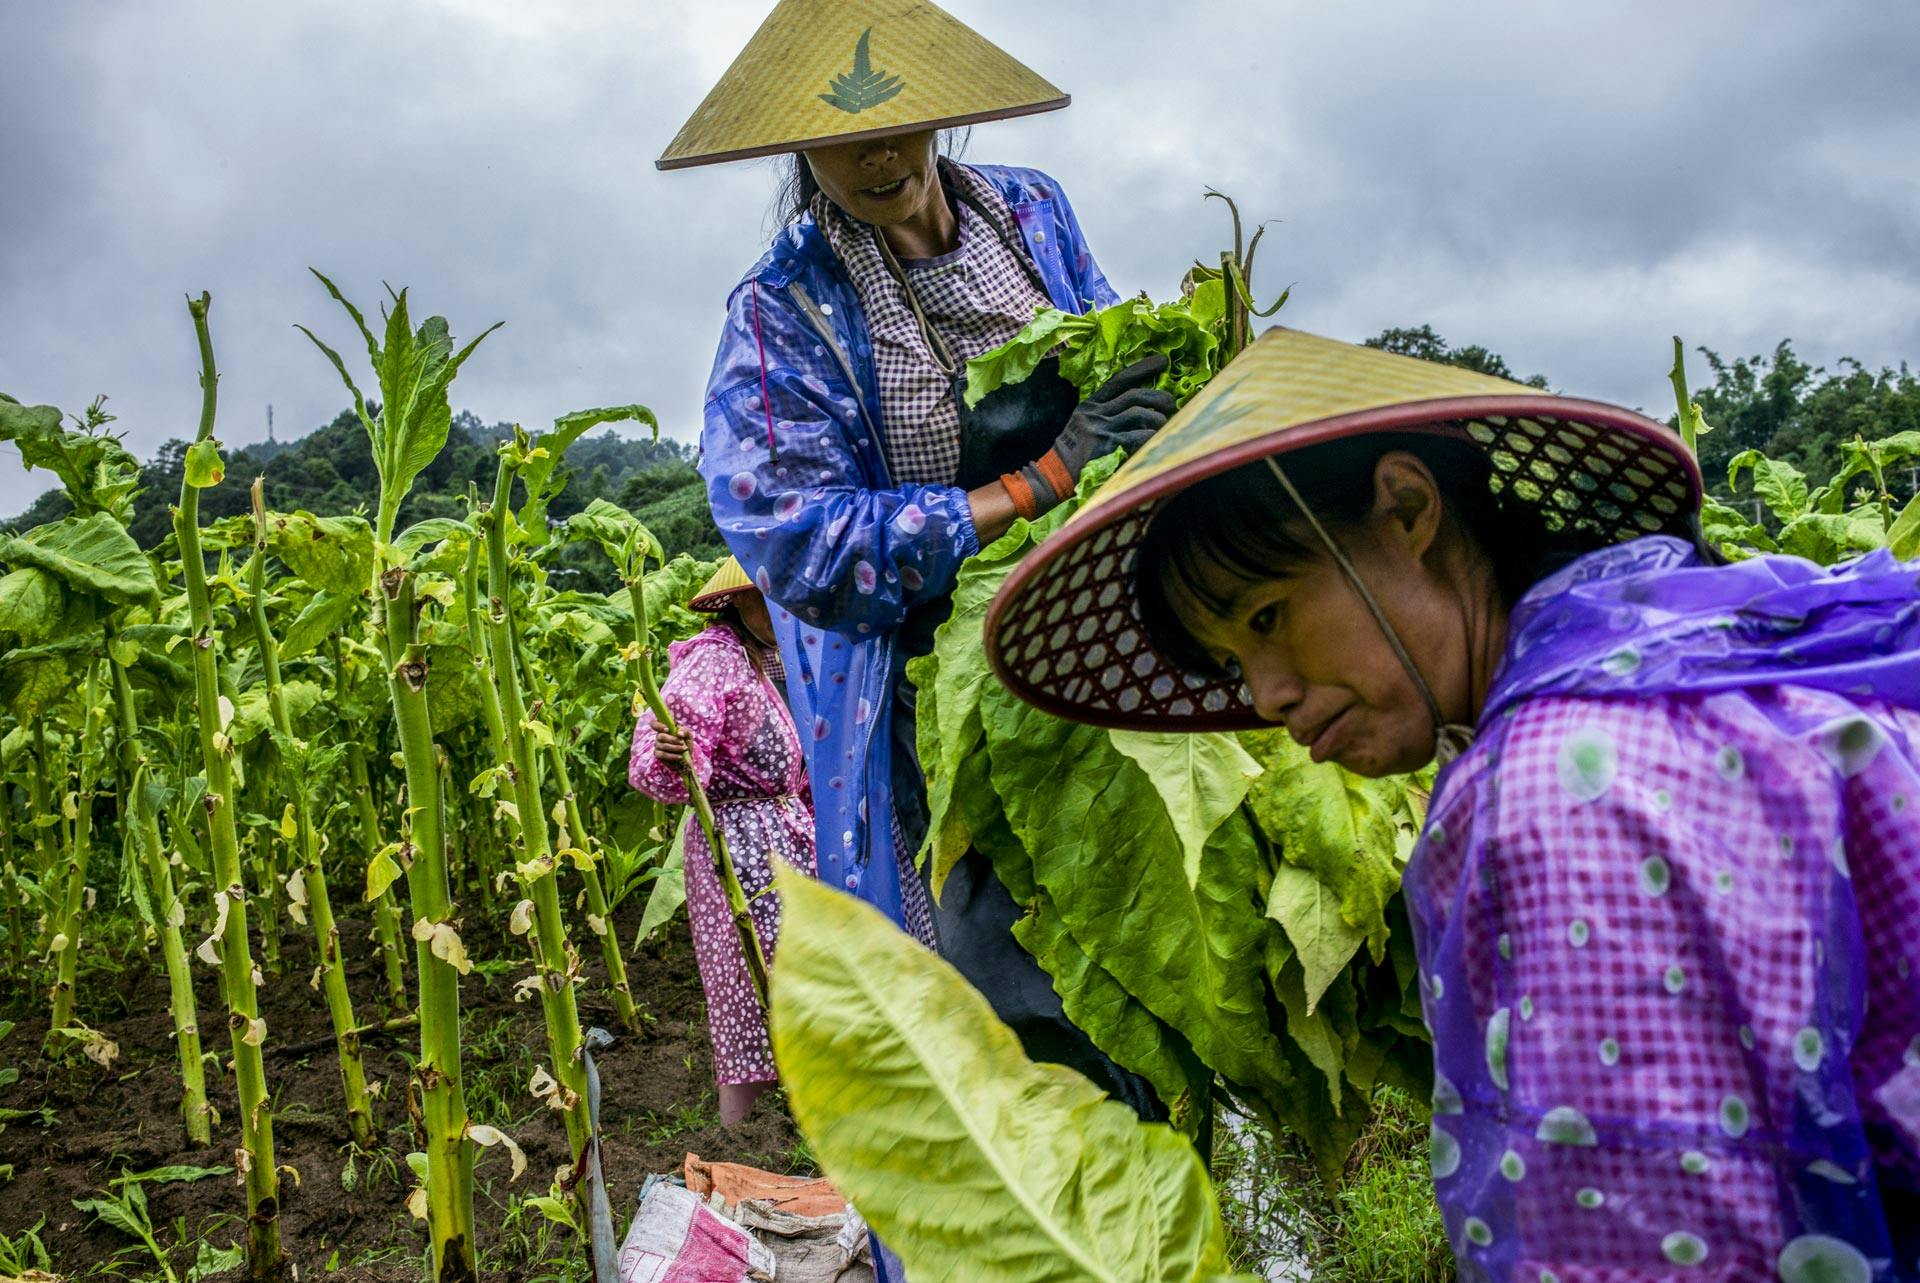 Workers harvest tobacco leaves at a plantation in the mountains of Yunnan province, China,